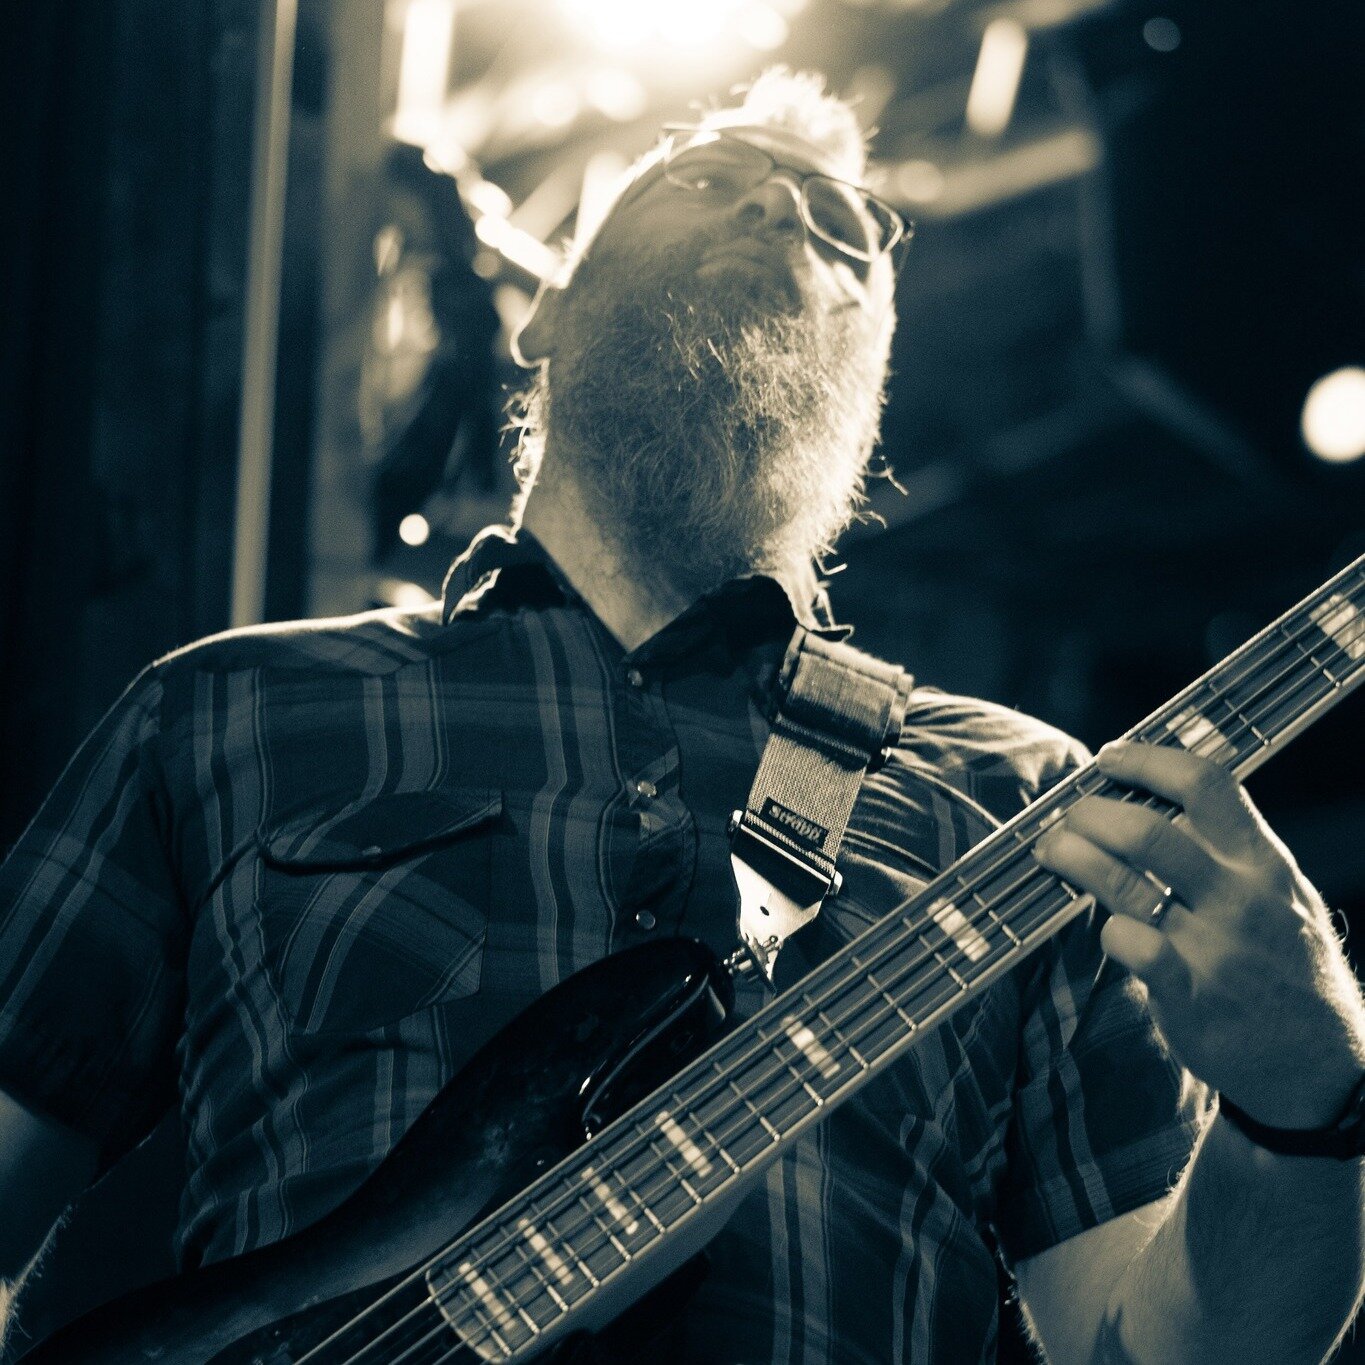 Happy birthday to our viking of a bass player, @jstandrews